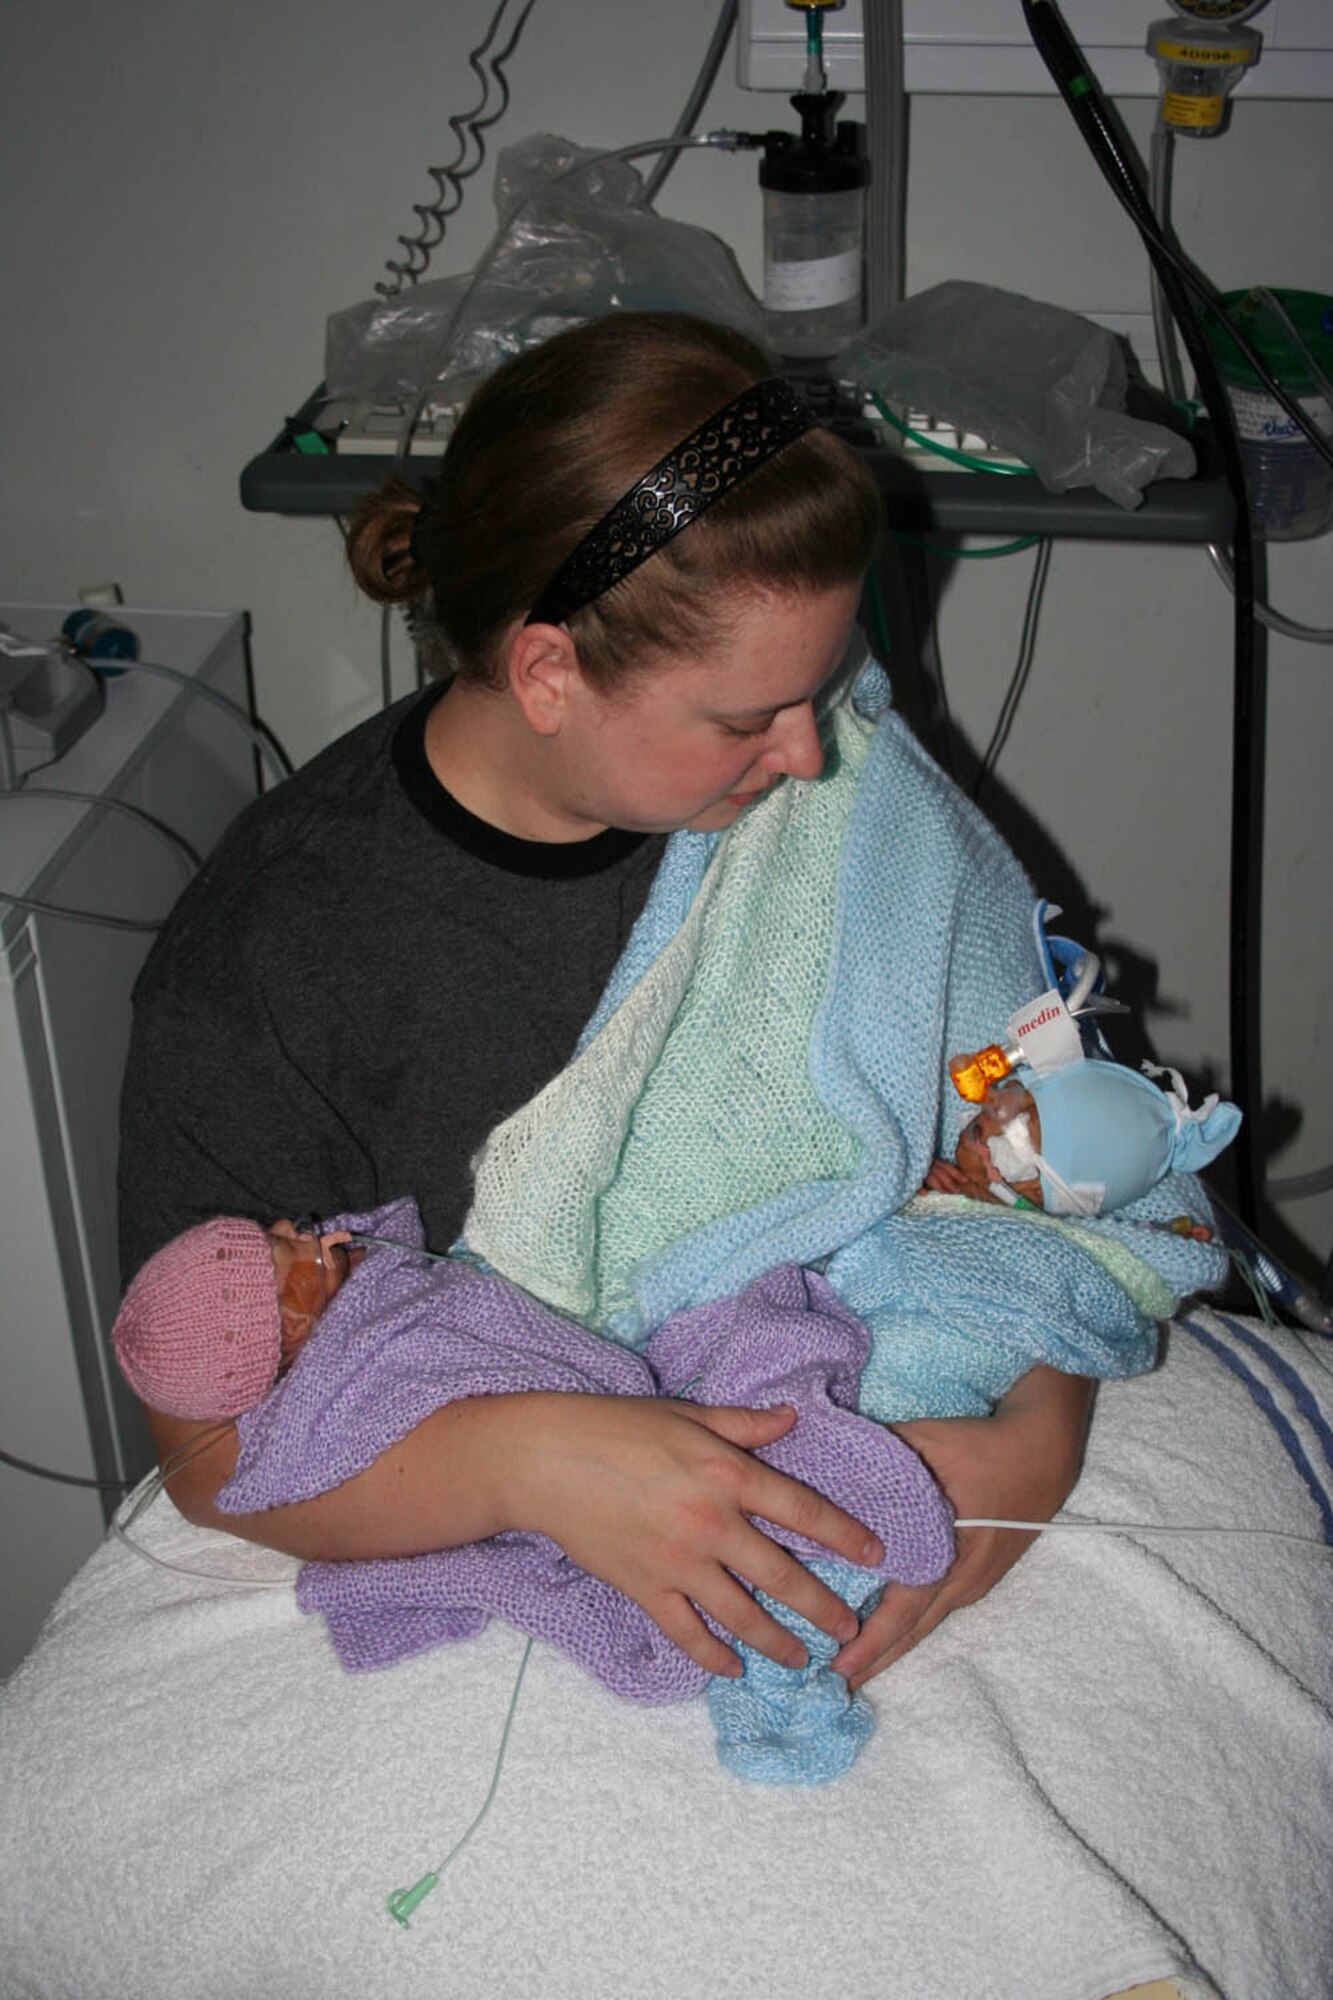 Mandy Frazier, wife of Tech. Sgt. Barry Frazier, 100th Air Refueling Wing Legal Office, holds her premature twins at the neonatal intensive care unit at Norfolk and Norwich Hospital, in November. The twins were born almost four months prematurely, Sept. 6. Her daughter Alexis, left, weighed just 1 pound, 3 ounces, and her brother, Eric, right, weighed 1 pound, 5 ounces. Sadly, Eric died Dec. 10 after suffering serious health problems. (Courtesy photo)